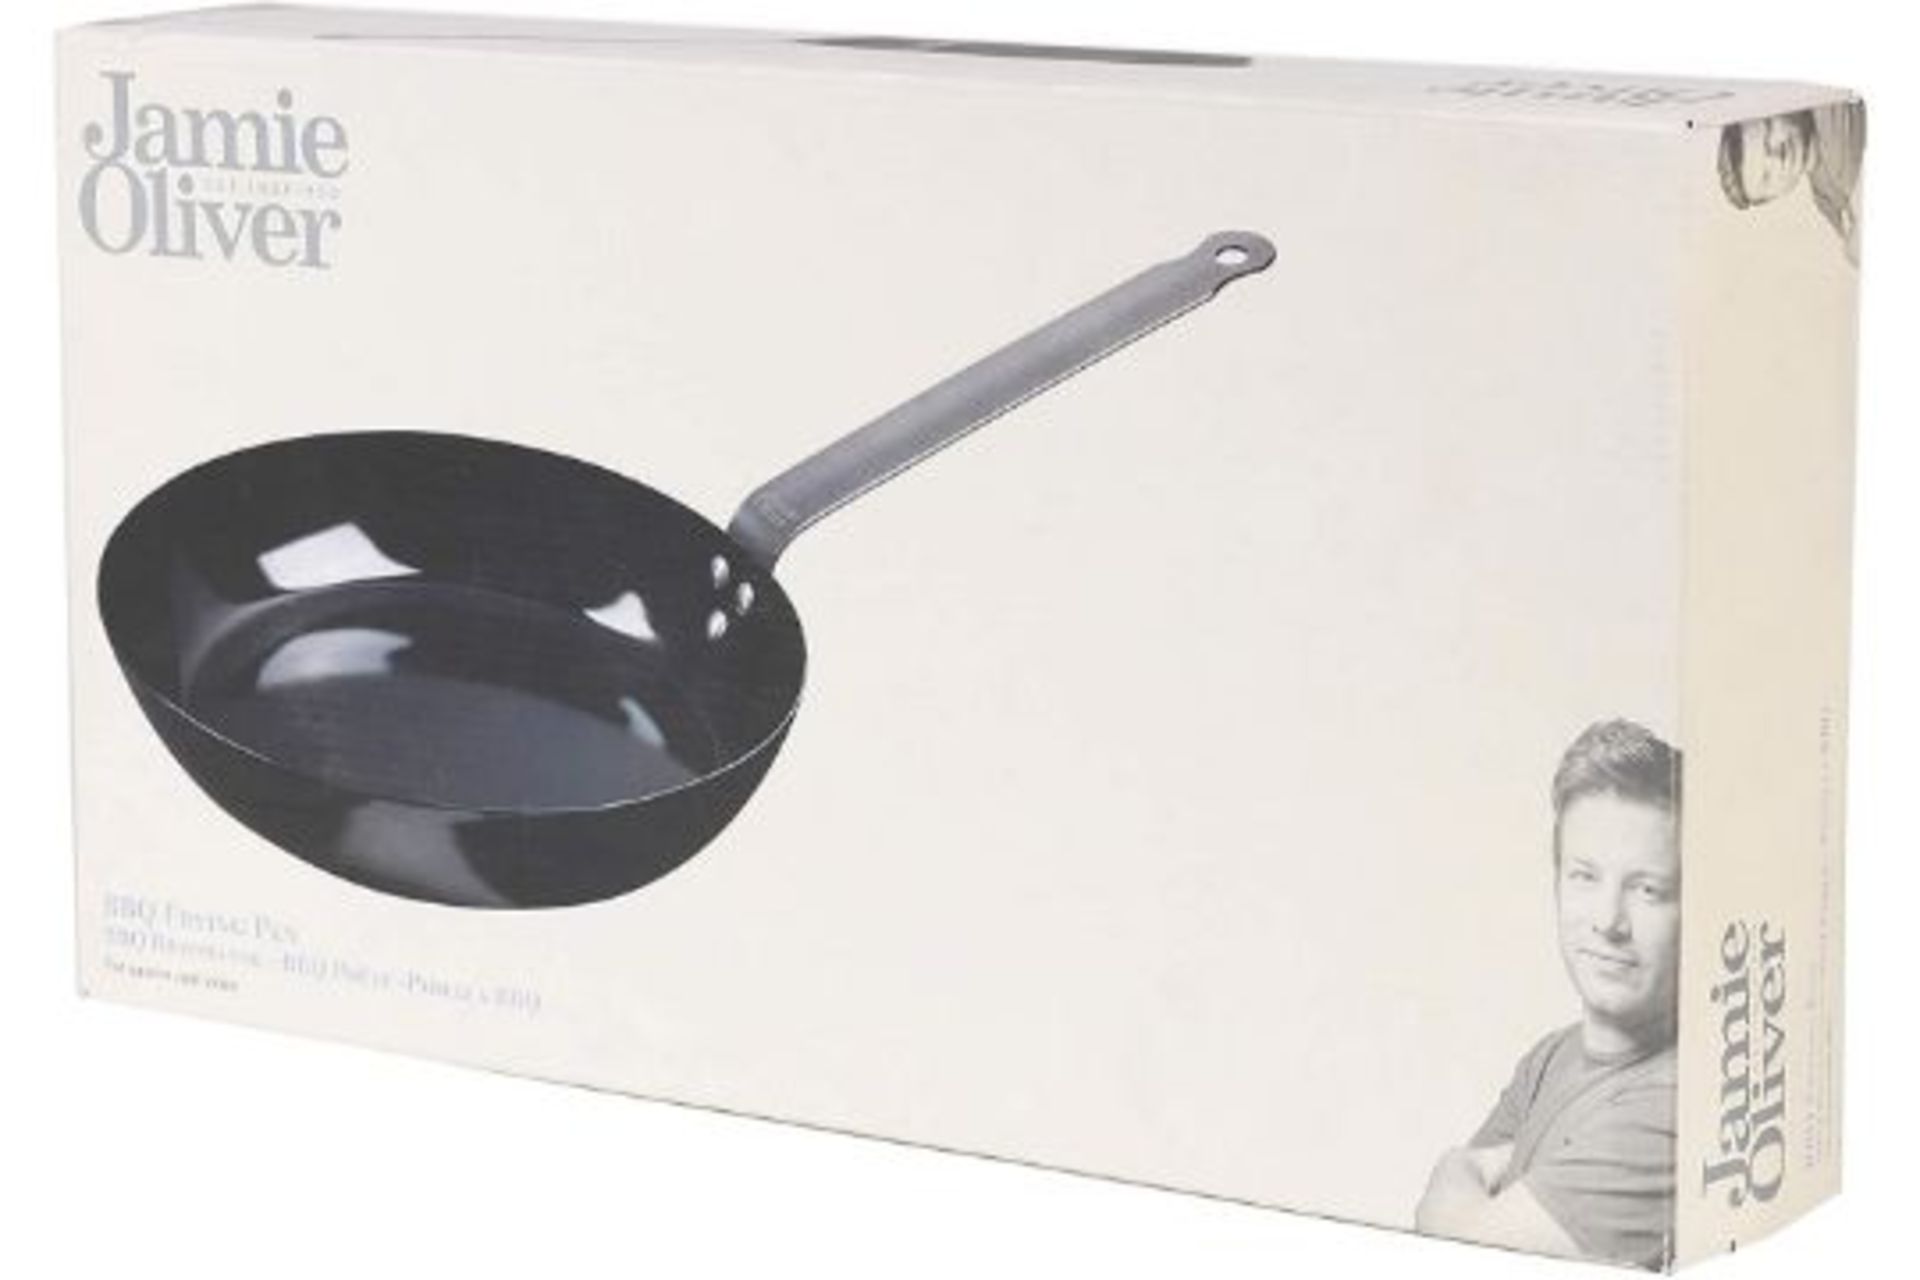 Brand New Jamie Oliver BBQ Frying Pan - RRP £20 - Image 2 of 2